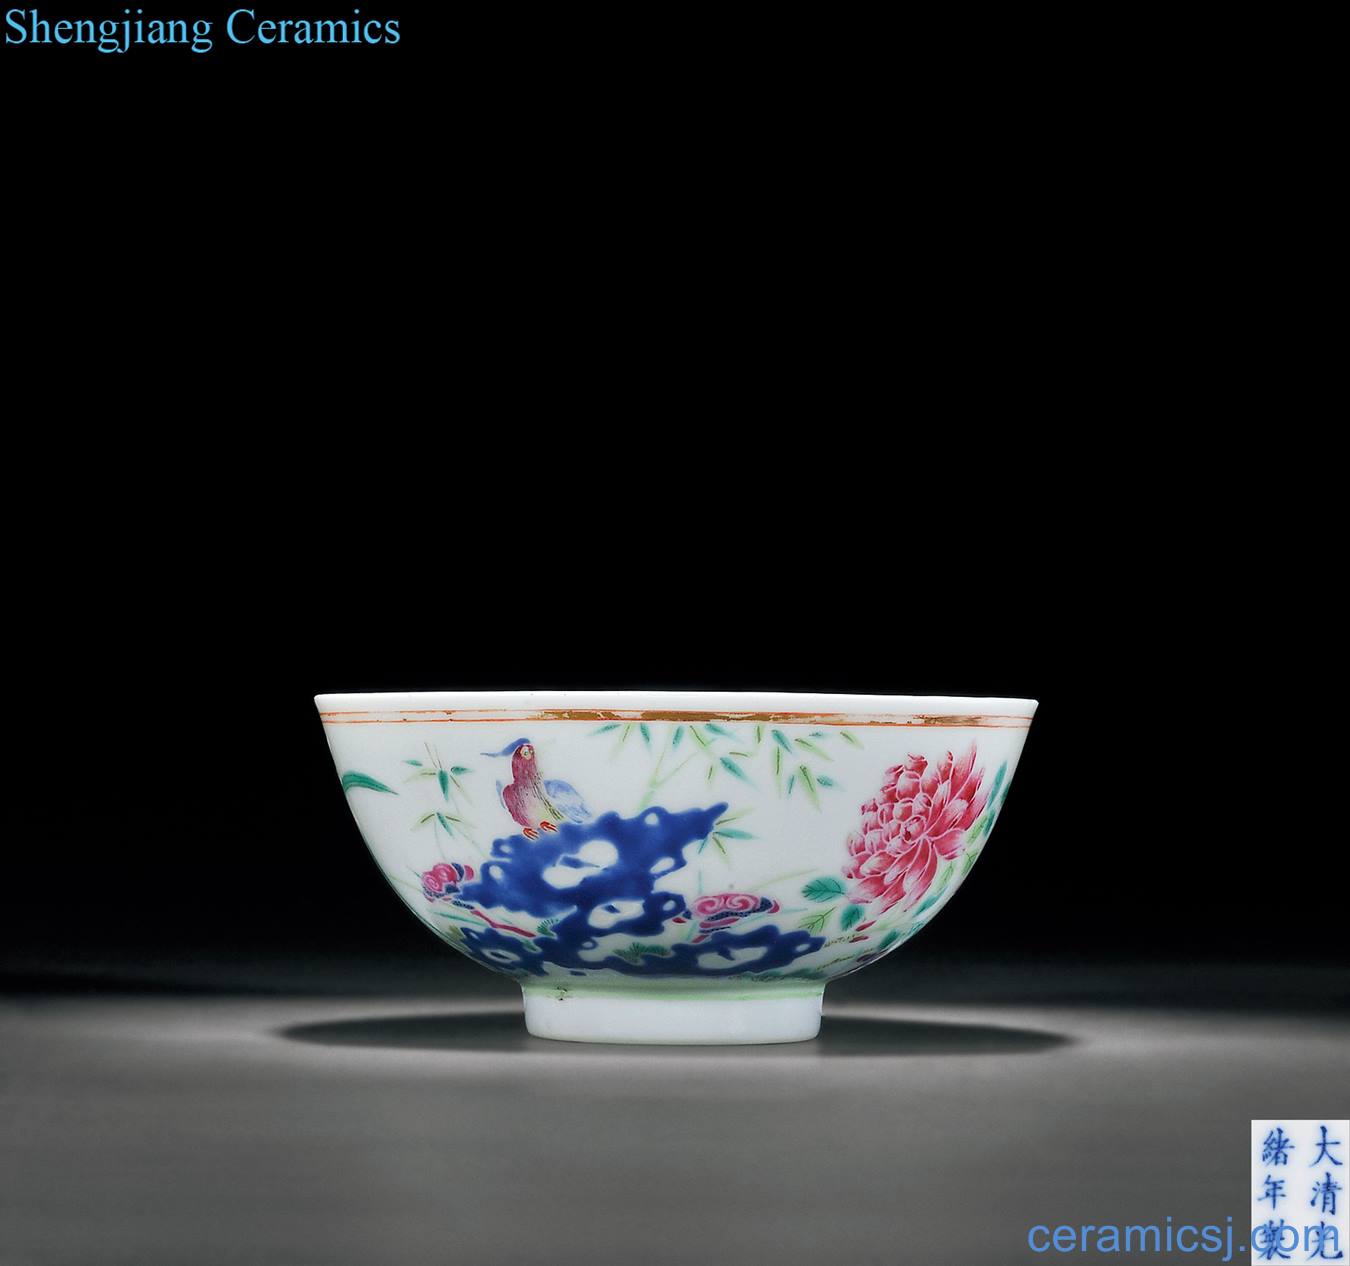 Pastel pheasants reign of qing emperor guangxu peony figure small bowl